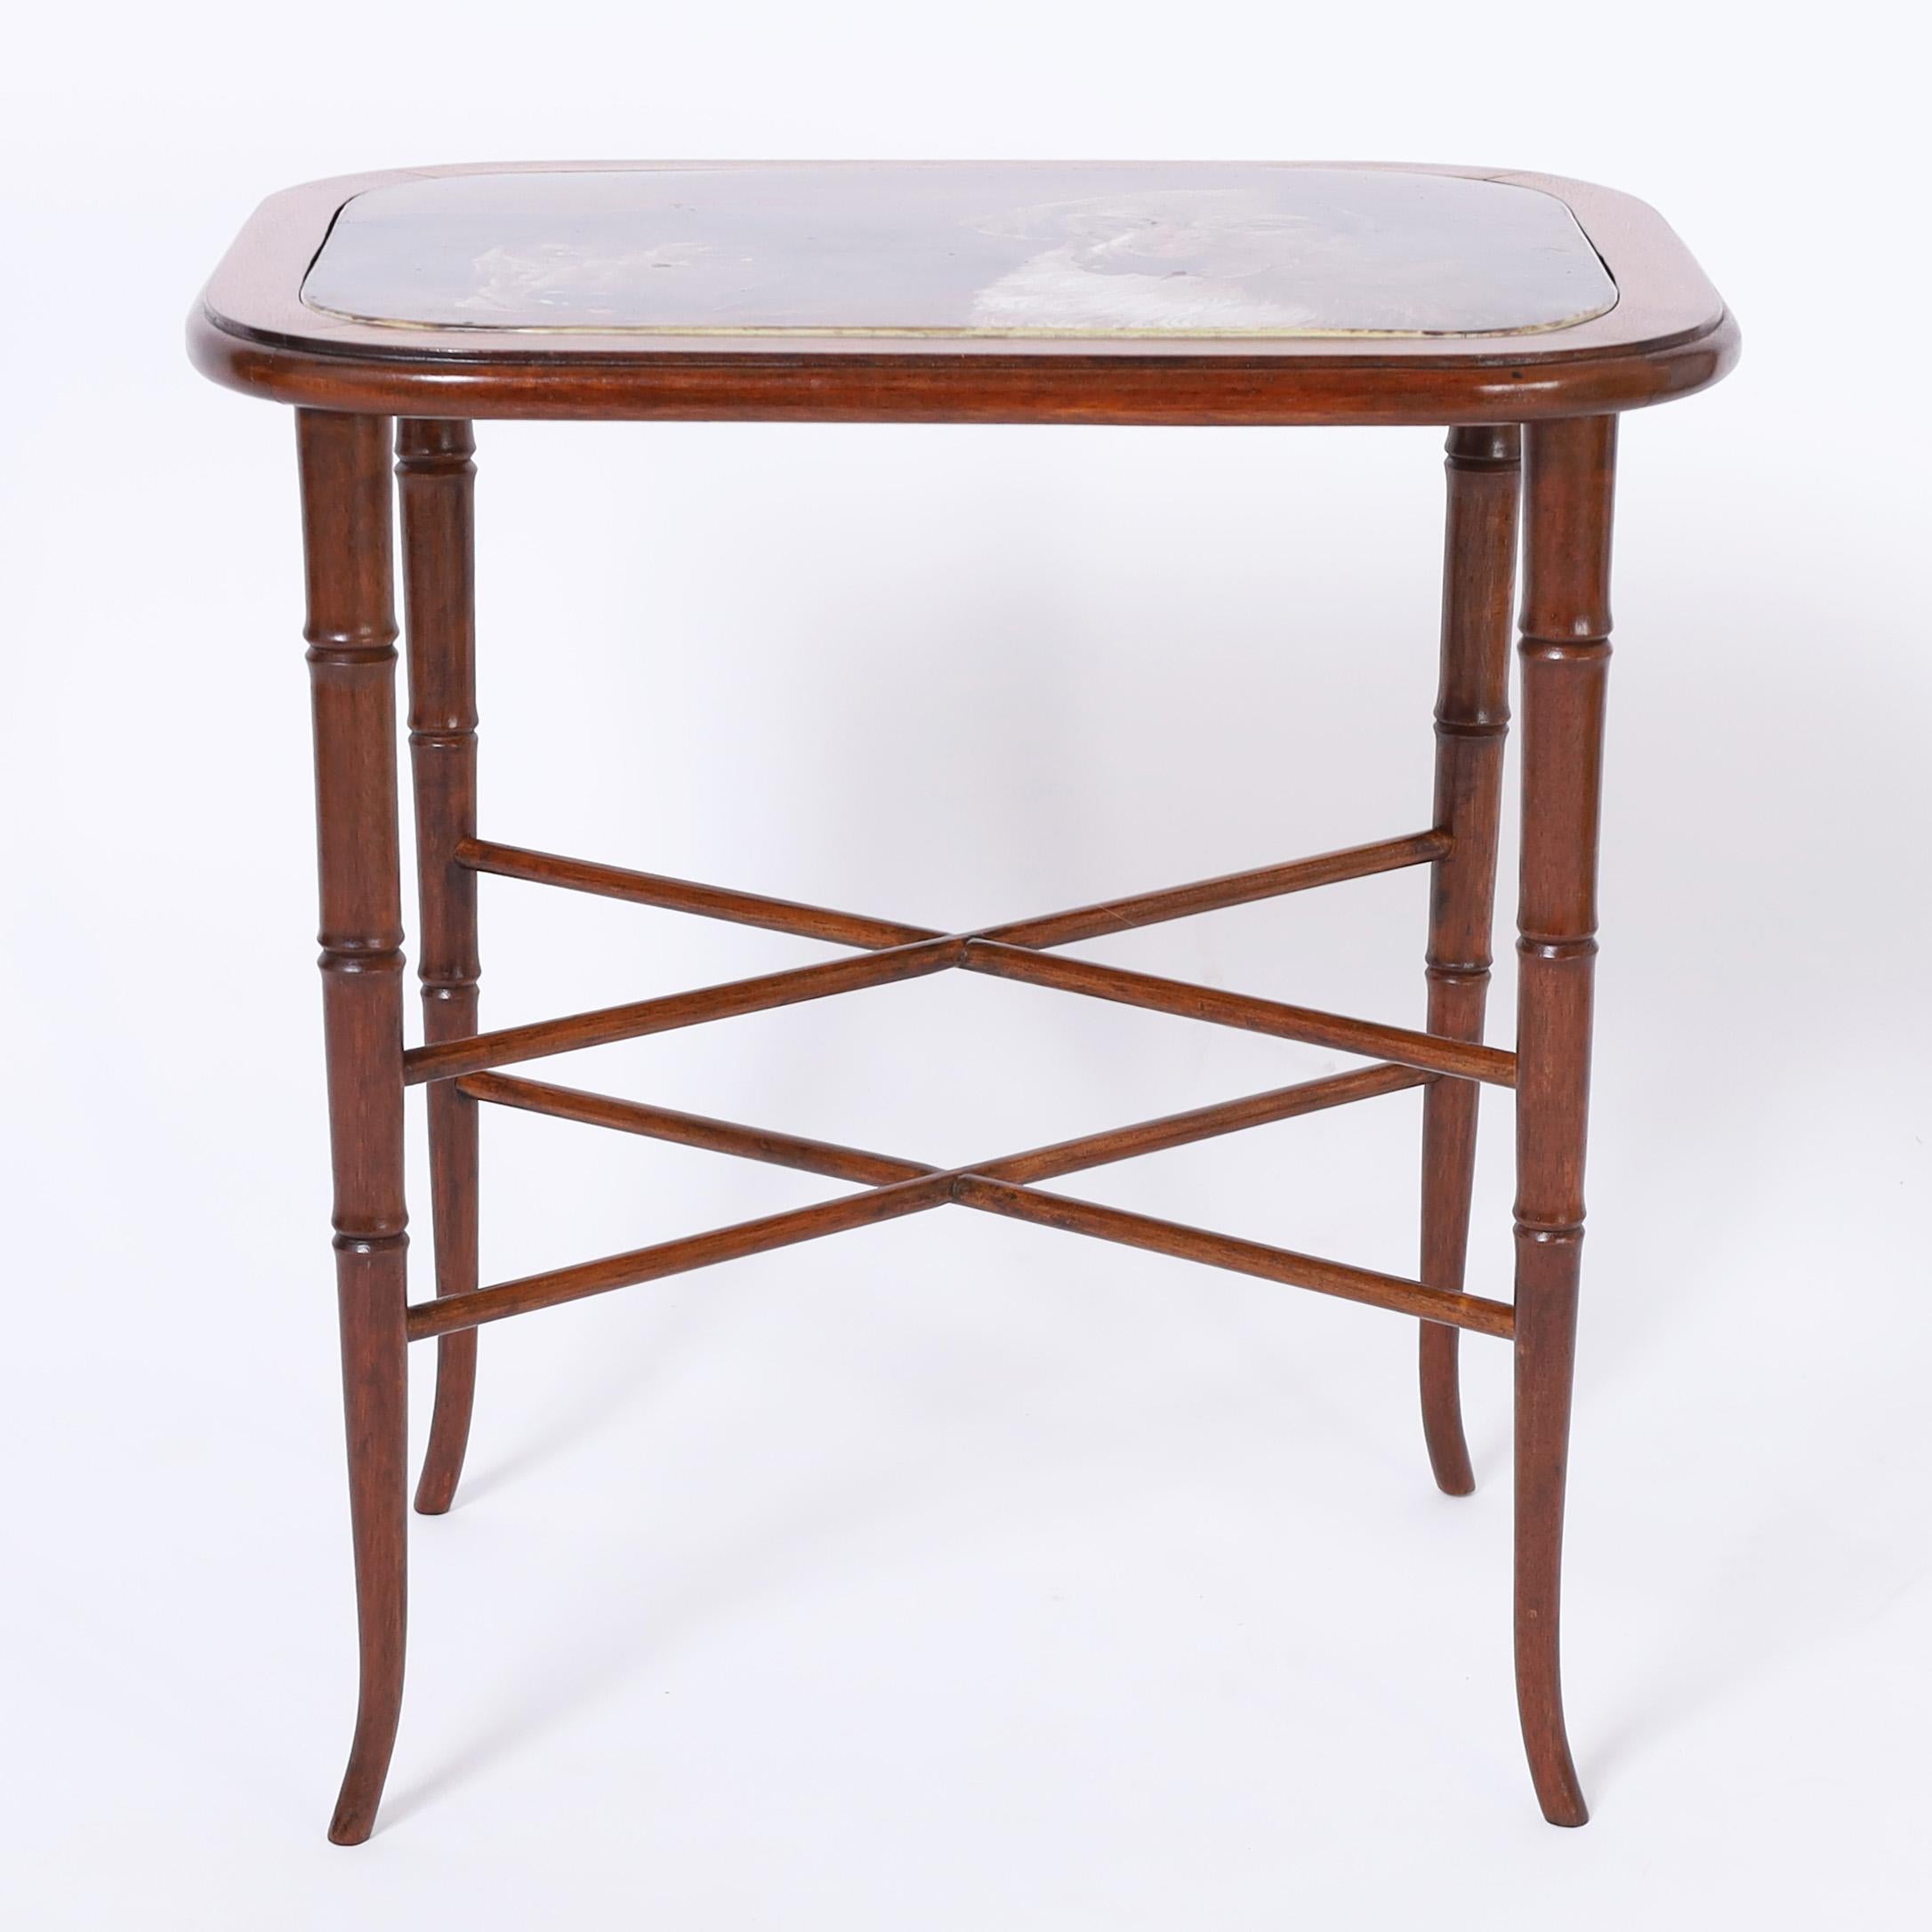 Impressive 19th century English table or stand having an earthenware top hand painted with two dogs and glazed, signed G S 1885 and set in a later custom made regency style faux bamboo base. Signed Sherwin, Cotton Hanley on the tile.